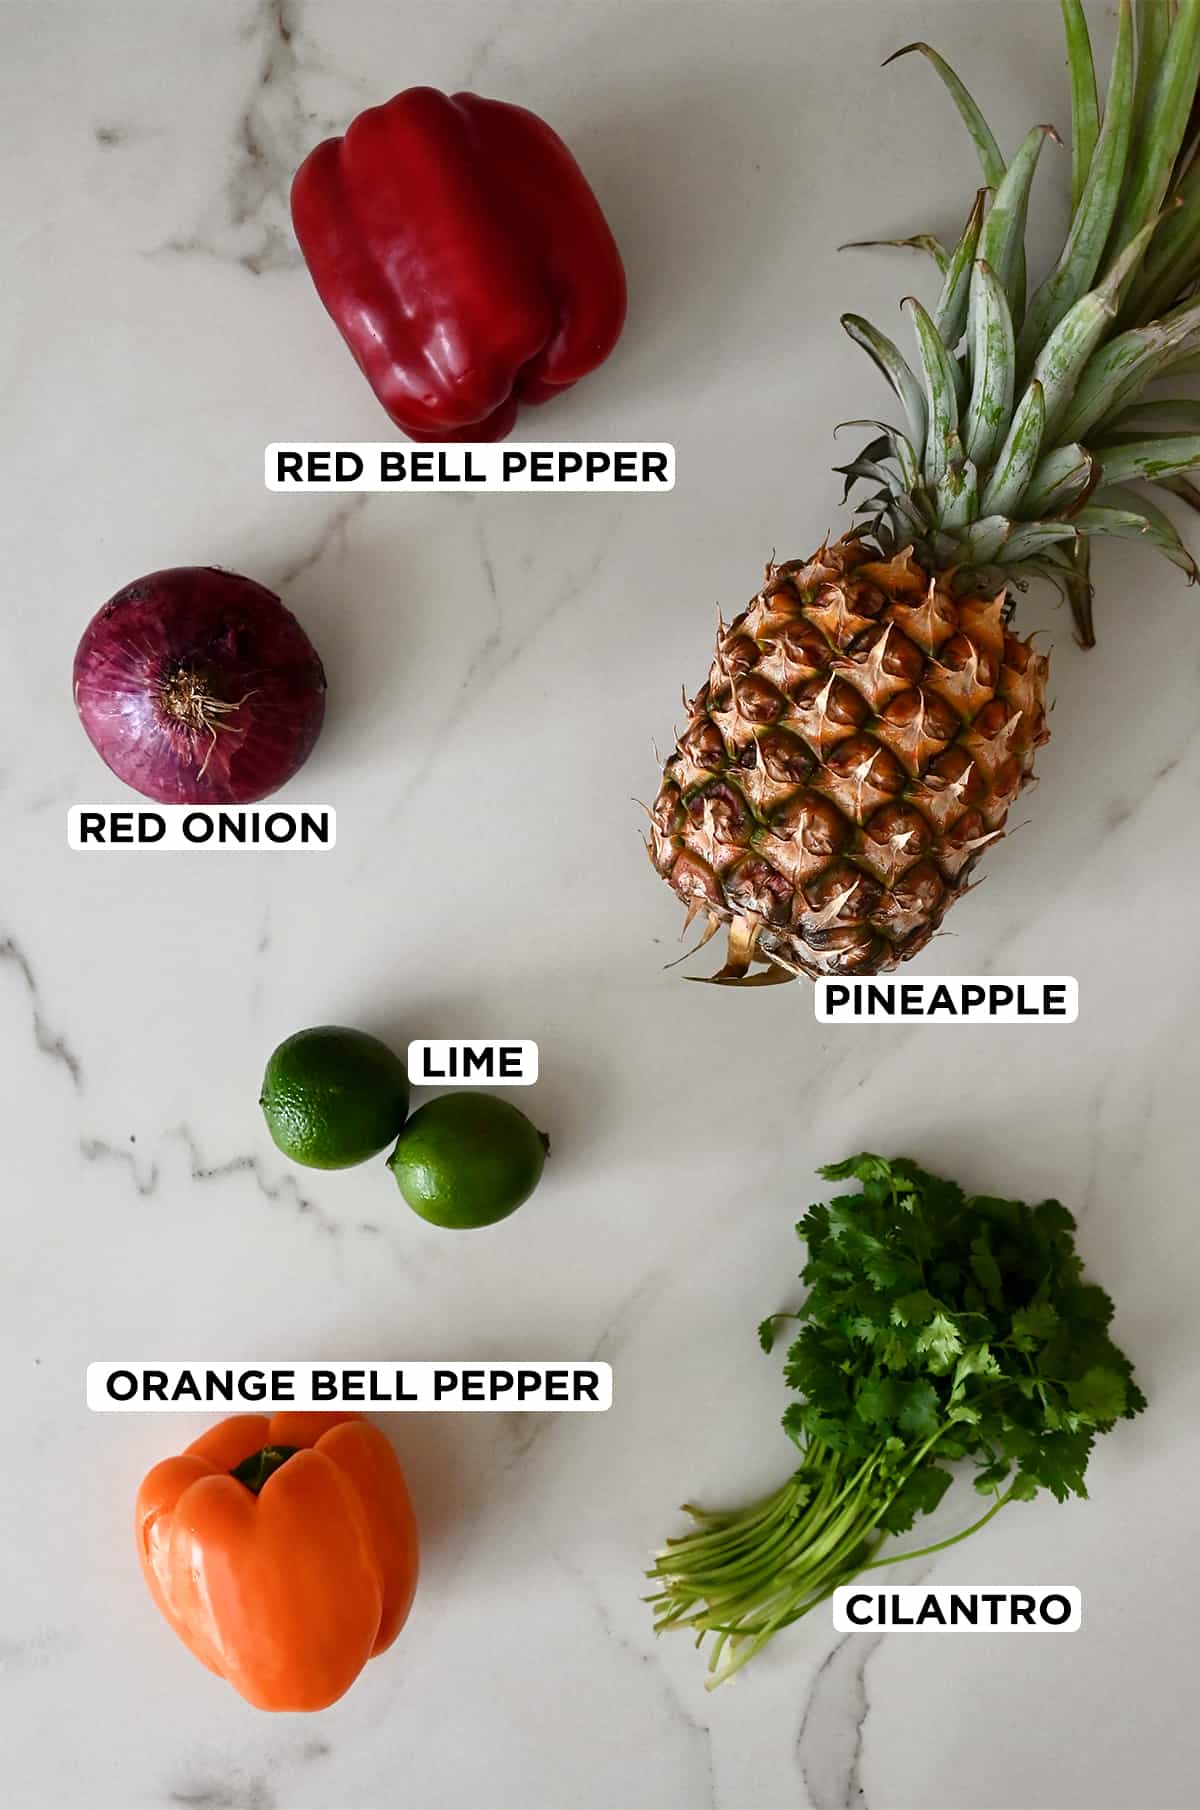 A top-down view of the fresh ingredients needed to make pineapple salsa, including red bell pepper, pineapple, cilantro, orange bell pepper, limes and red onion.